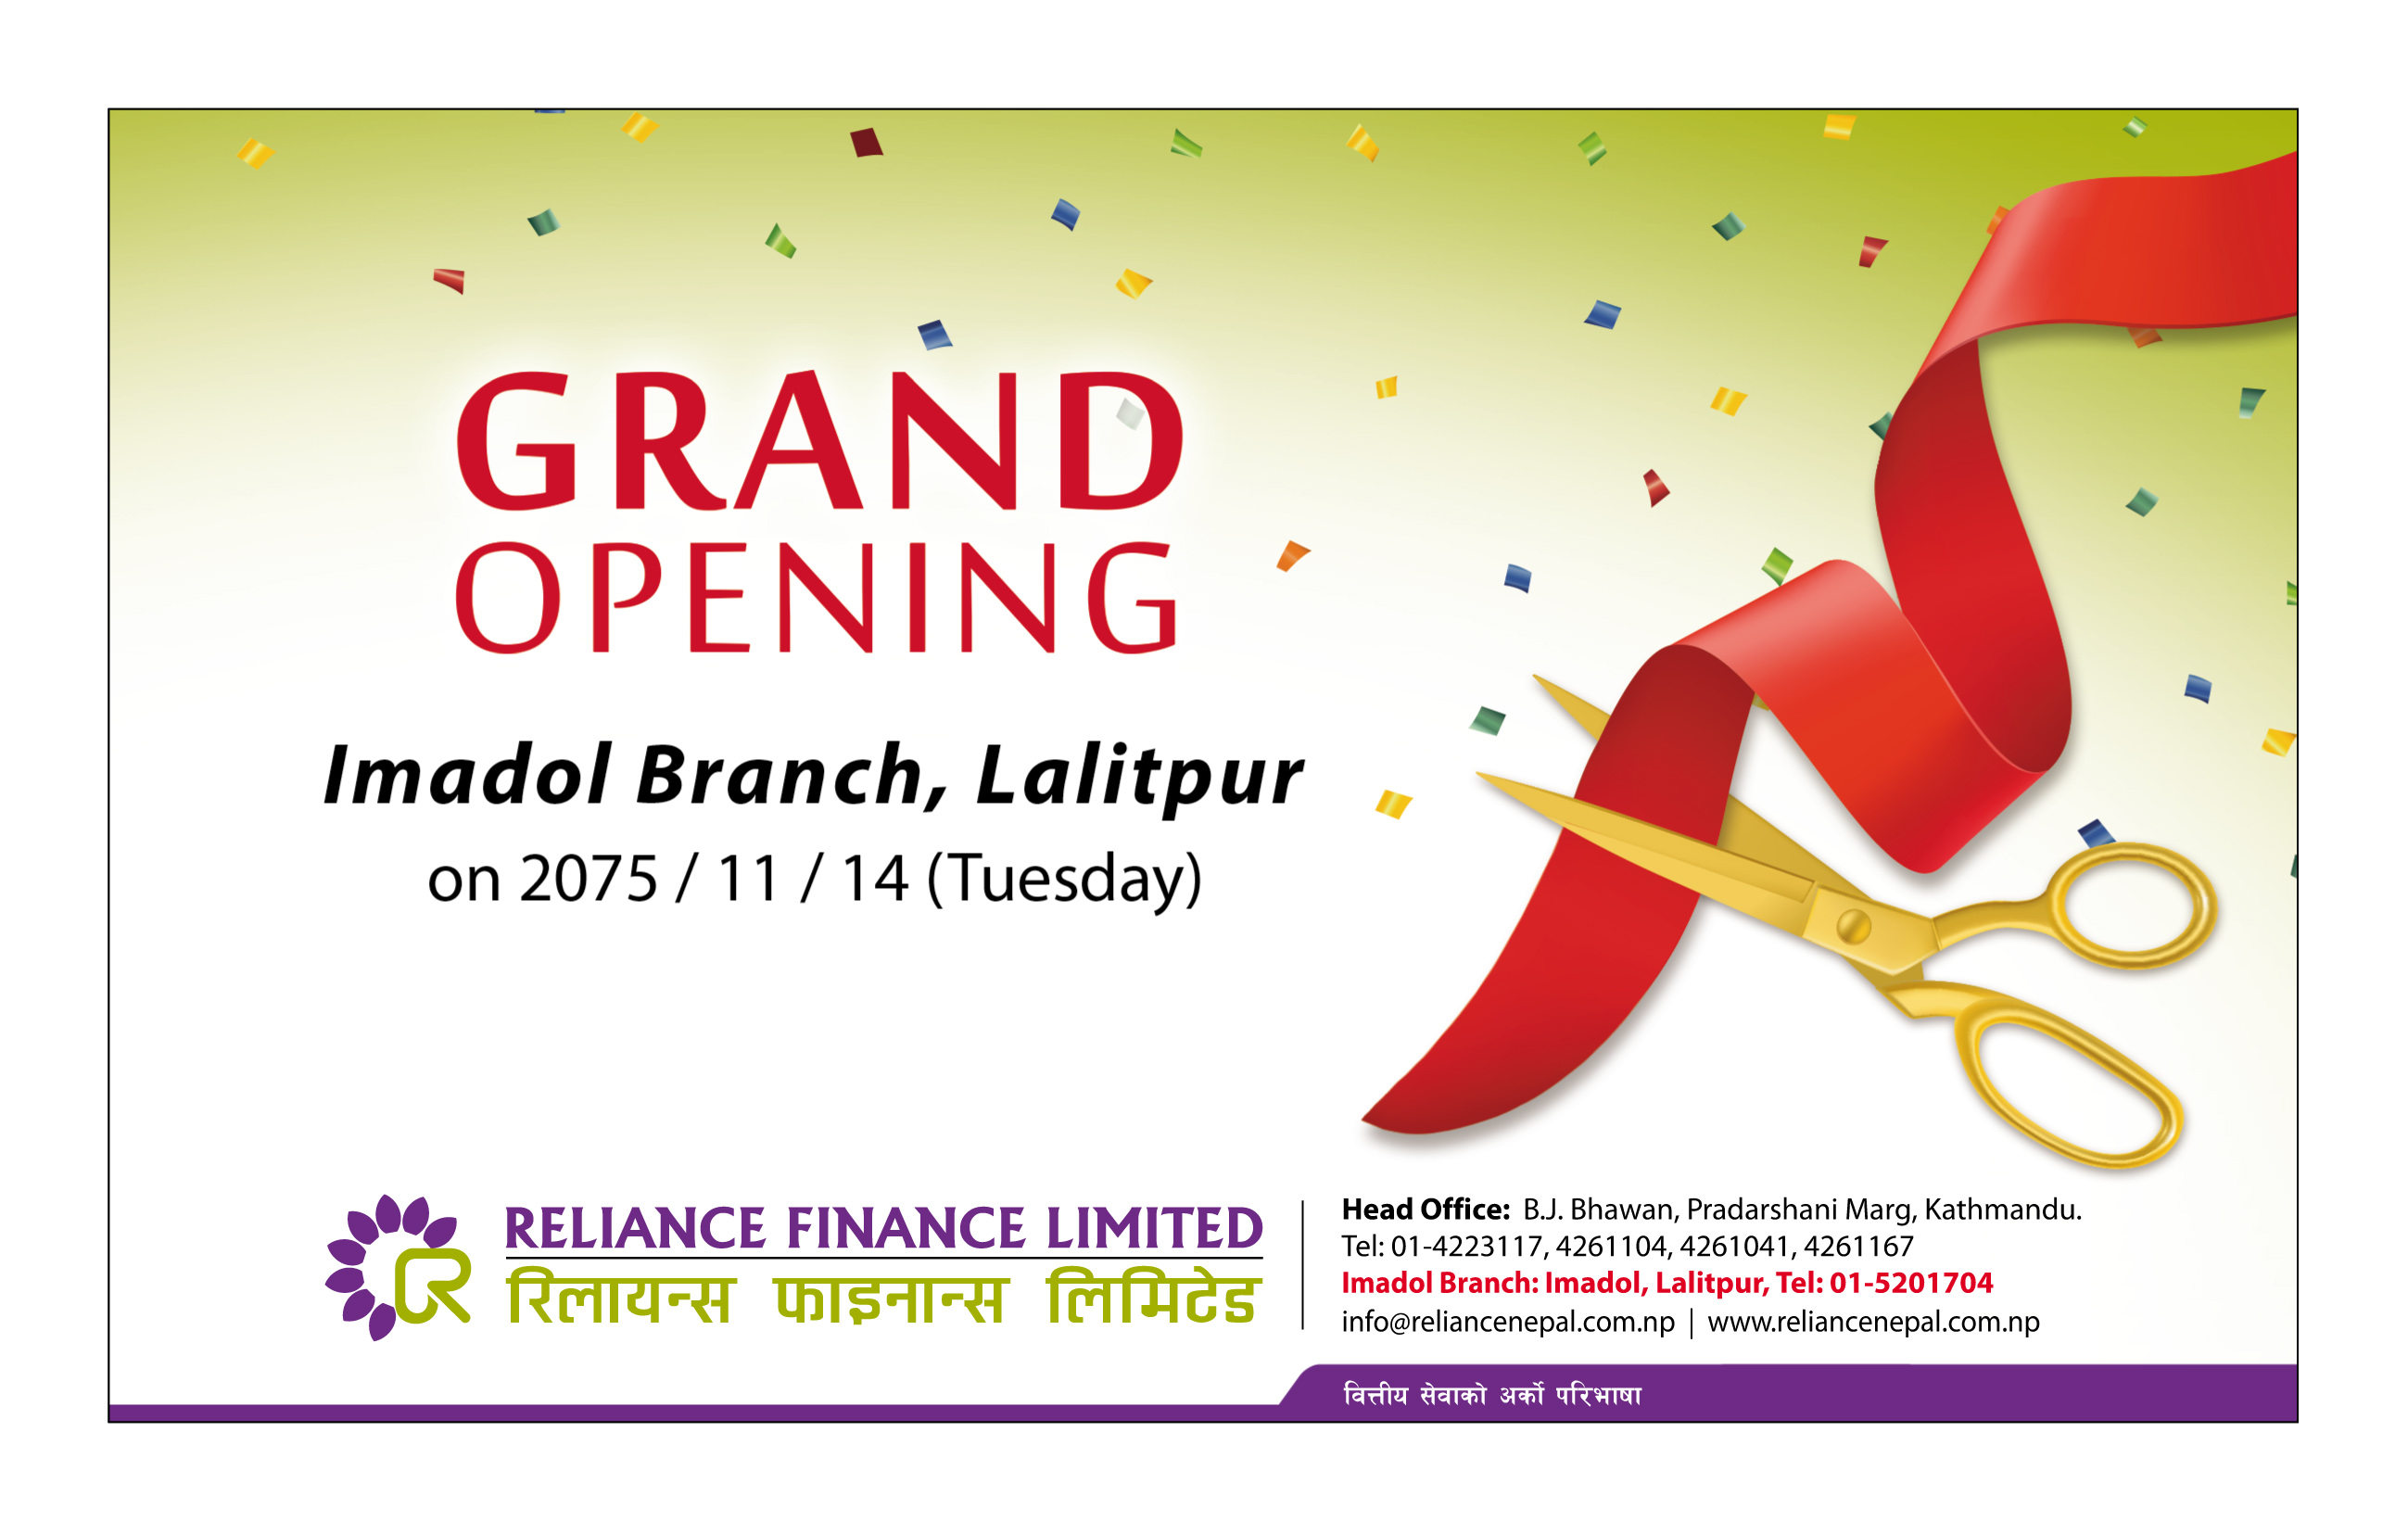 Reliance Finance Limited  New branch at Imadol, Lalitpur